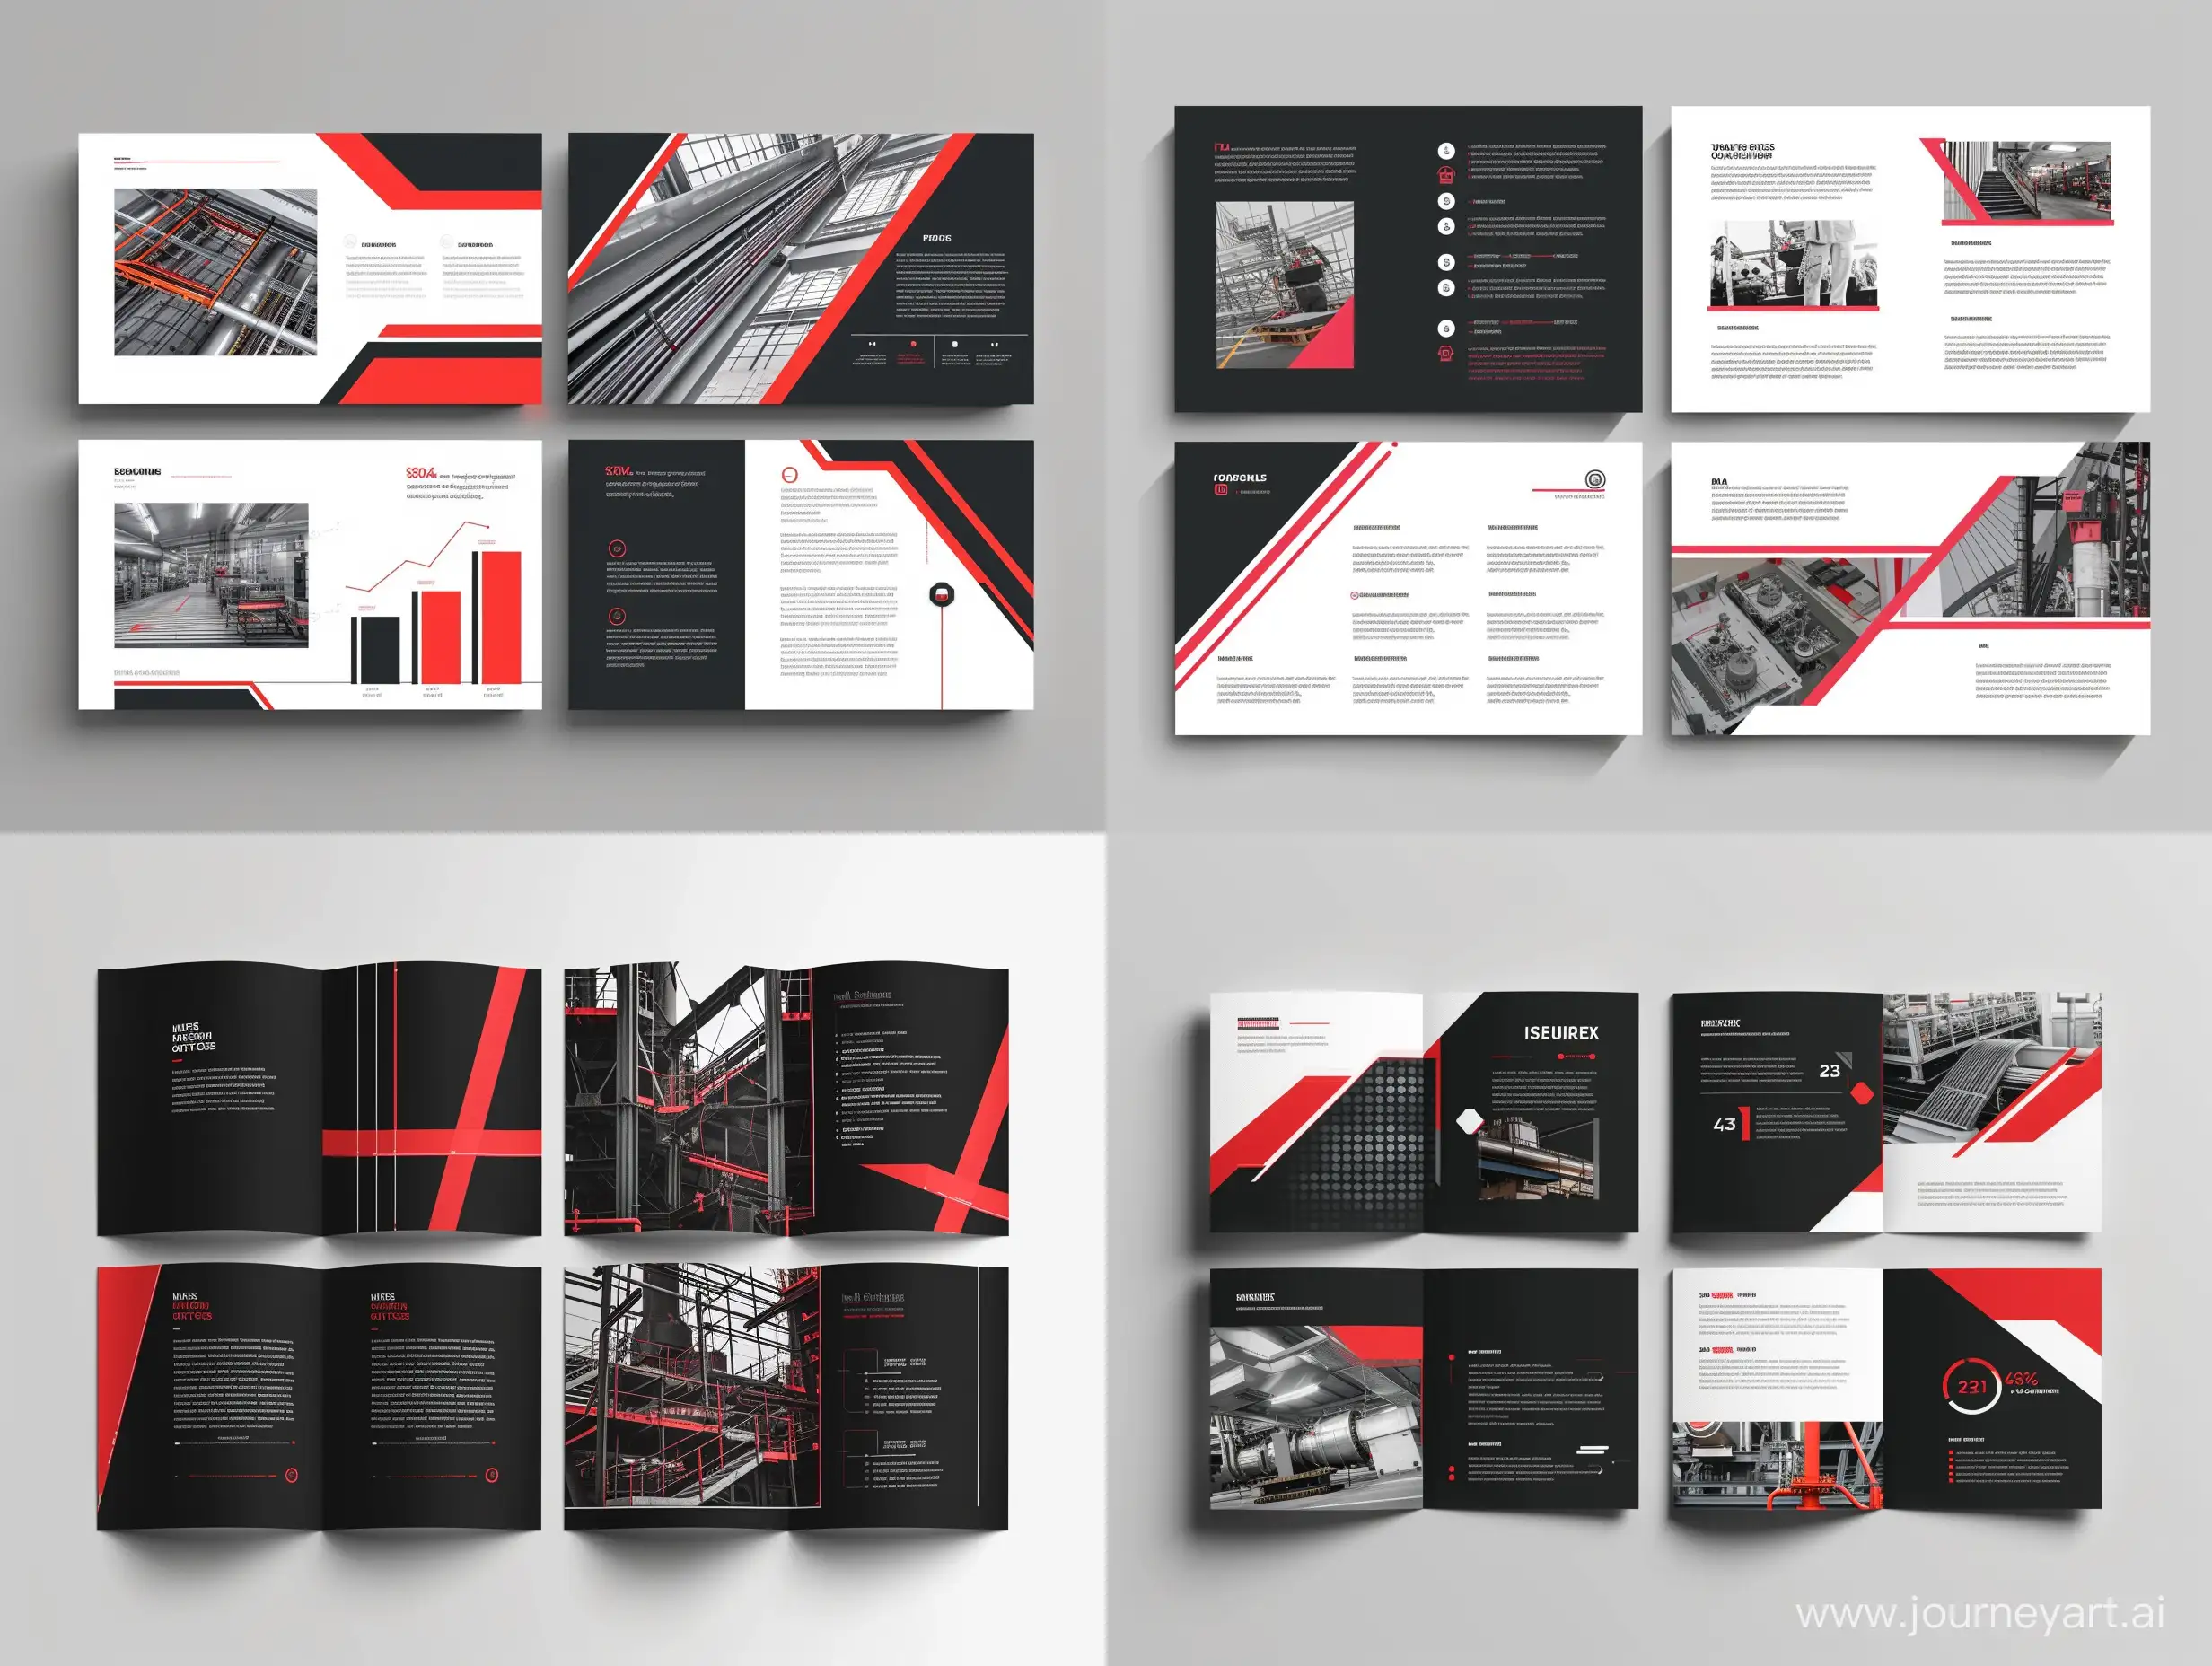 Modern-Engineering-Company-Presentation-Sleek-4Page-Design-in-Black-White-and-Red